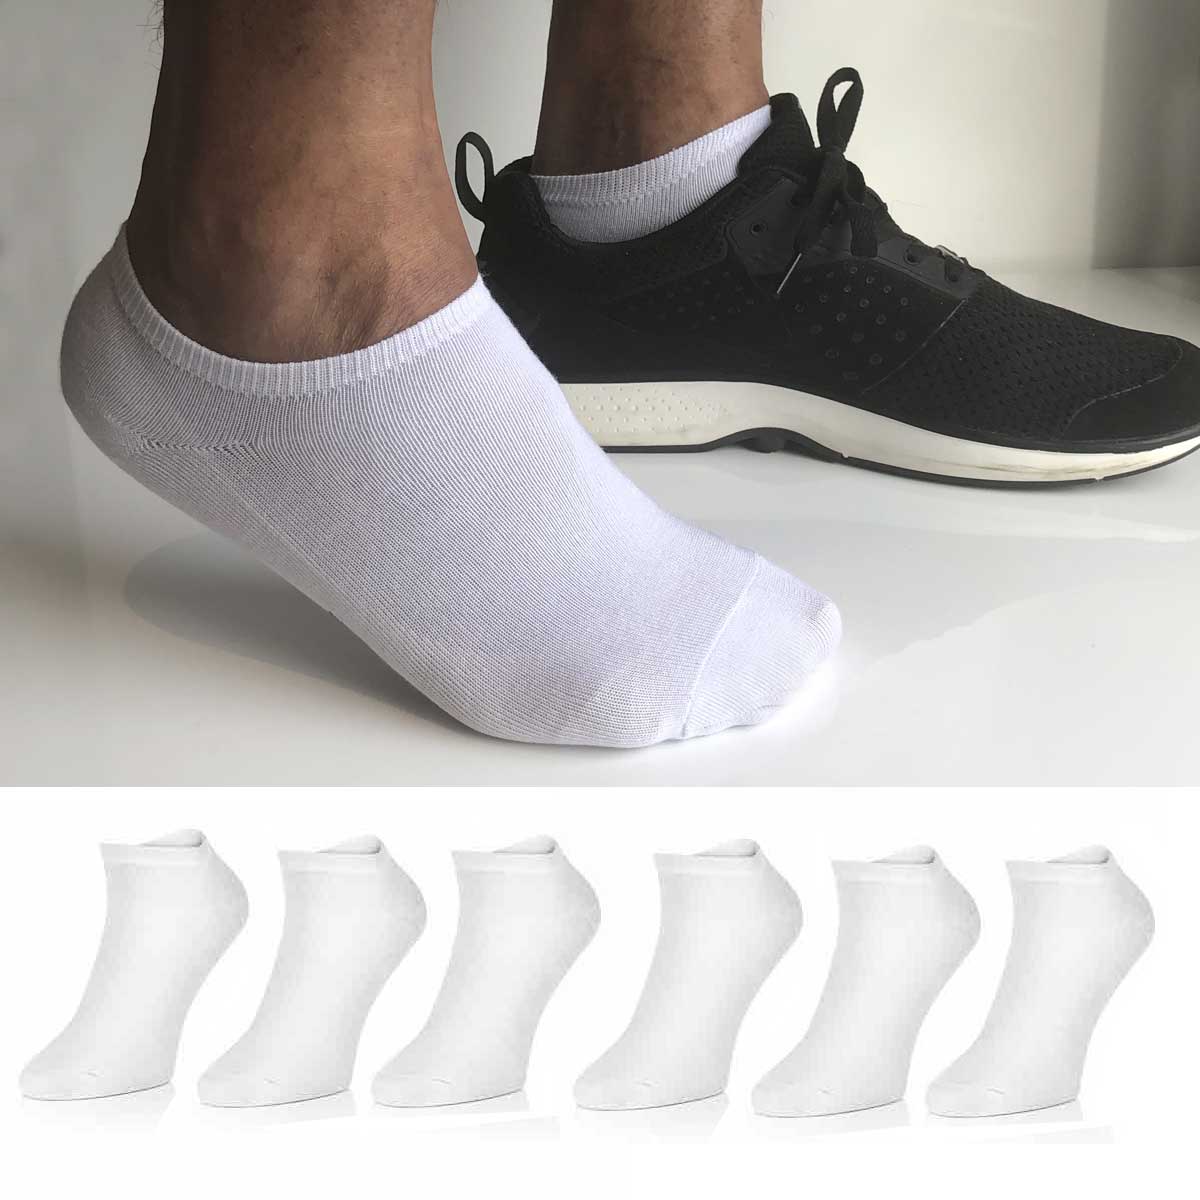 3-pack of cotton ankle socks